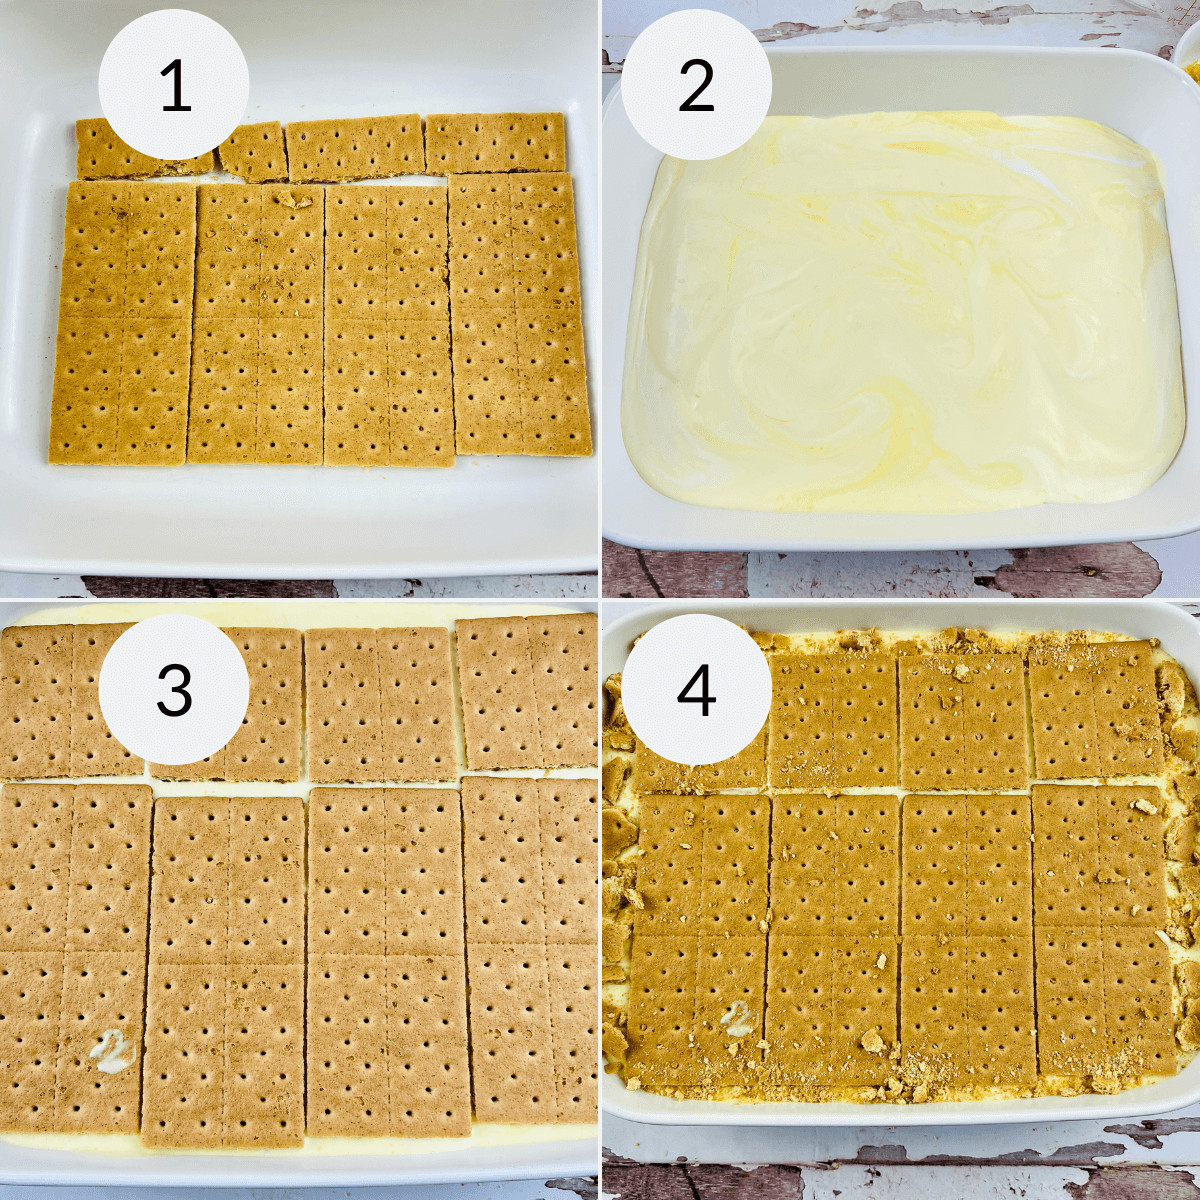 Layering the graham crackers and the filling for the lemon dessert.